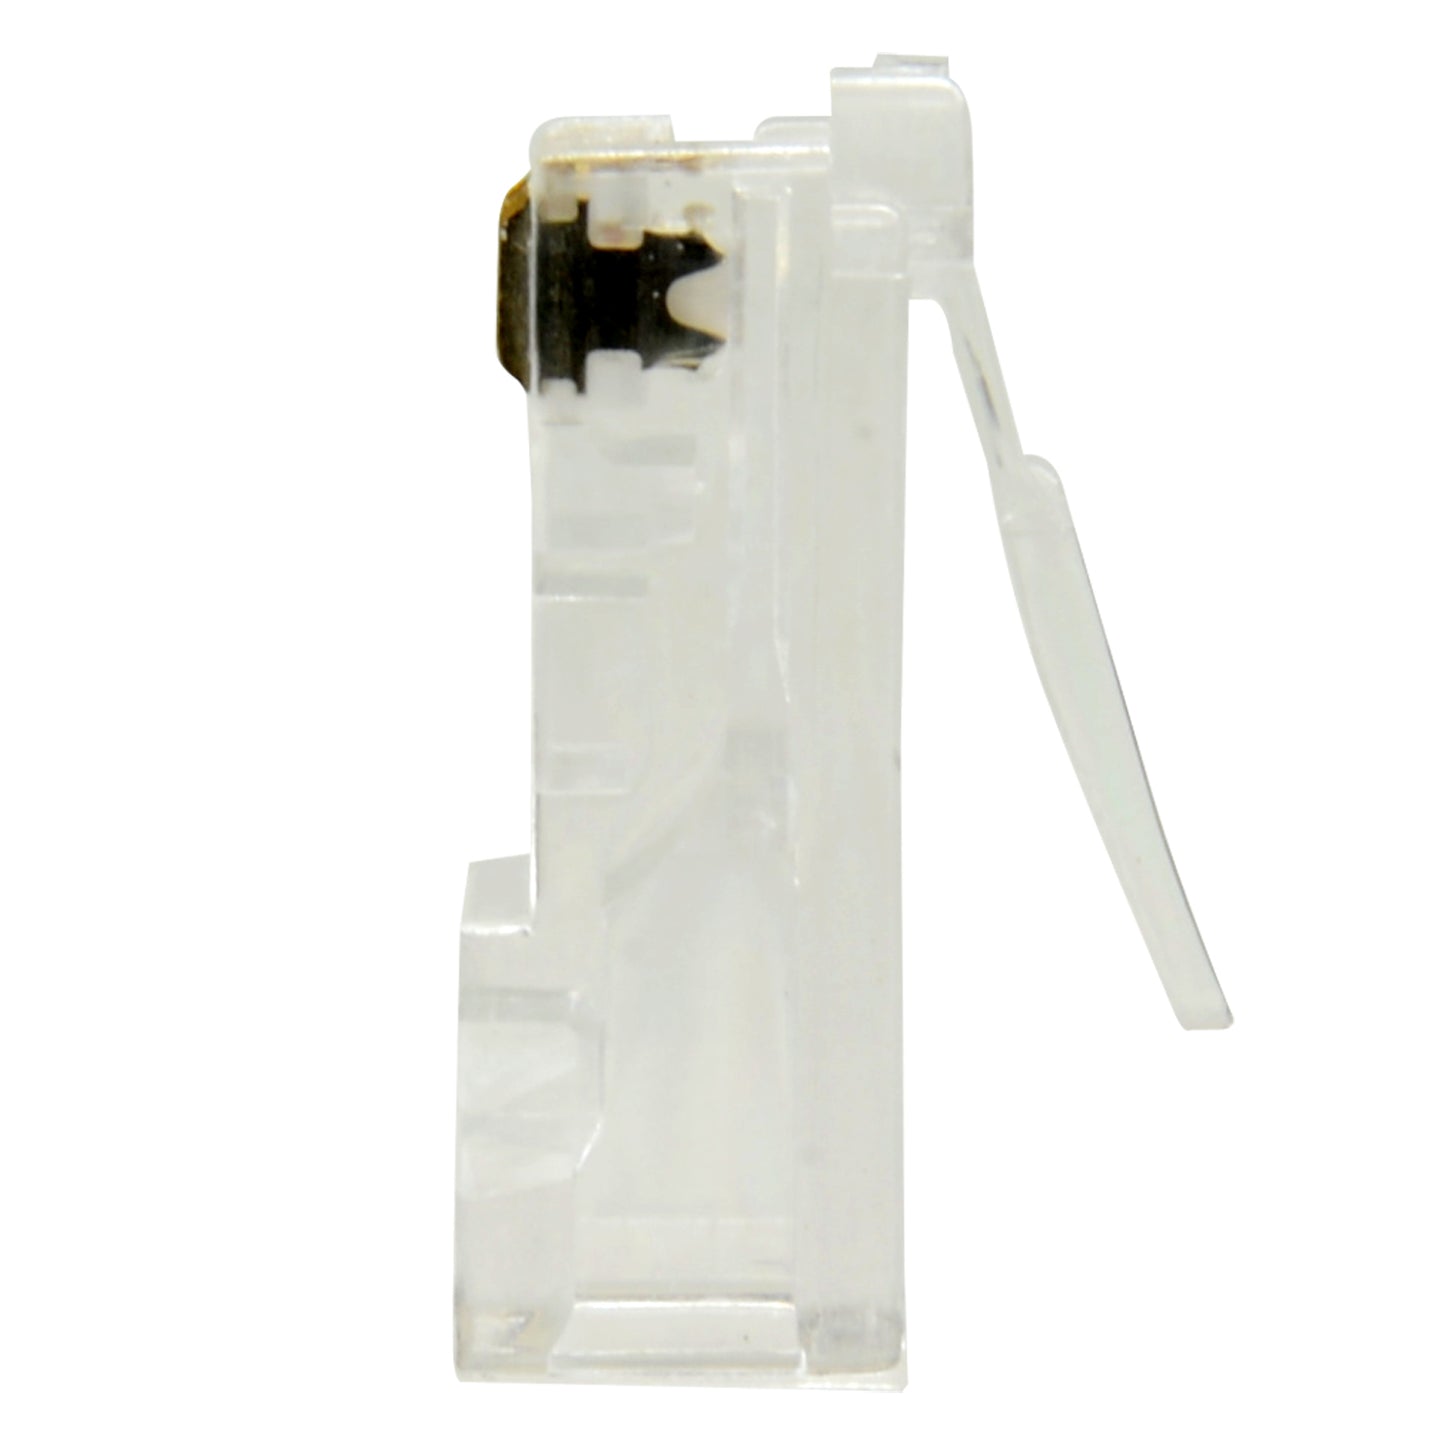 Connector - RJ45 for crimping - Compatible with UTP cable - 20mm (Fo) - 10mm (An) - 5g